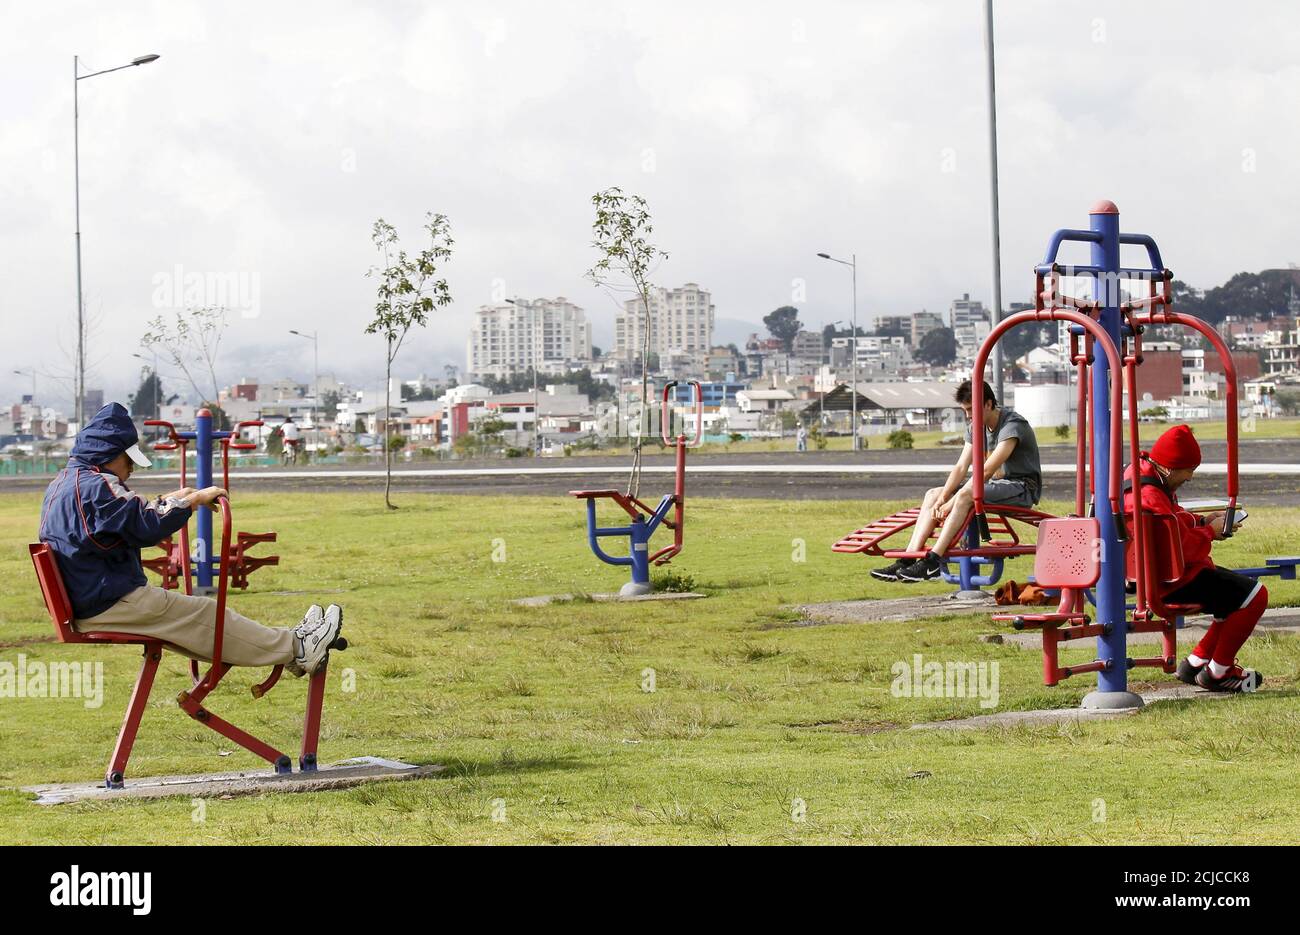 People exercise at the site of the former Quito airport, which was converted into a recreational area named Bicentenario park, in Quito March 6, 2016. REUTERS/Guillermo Granja Stock Photo